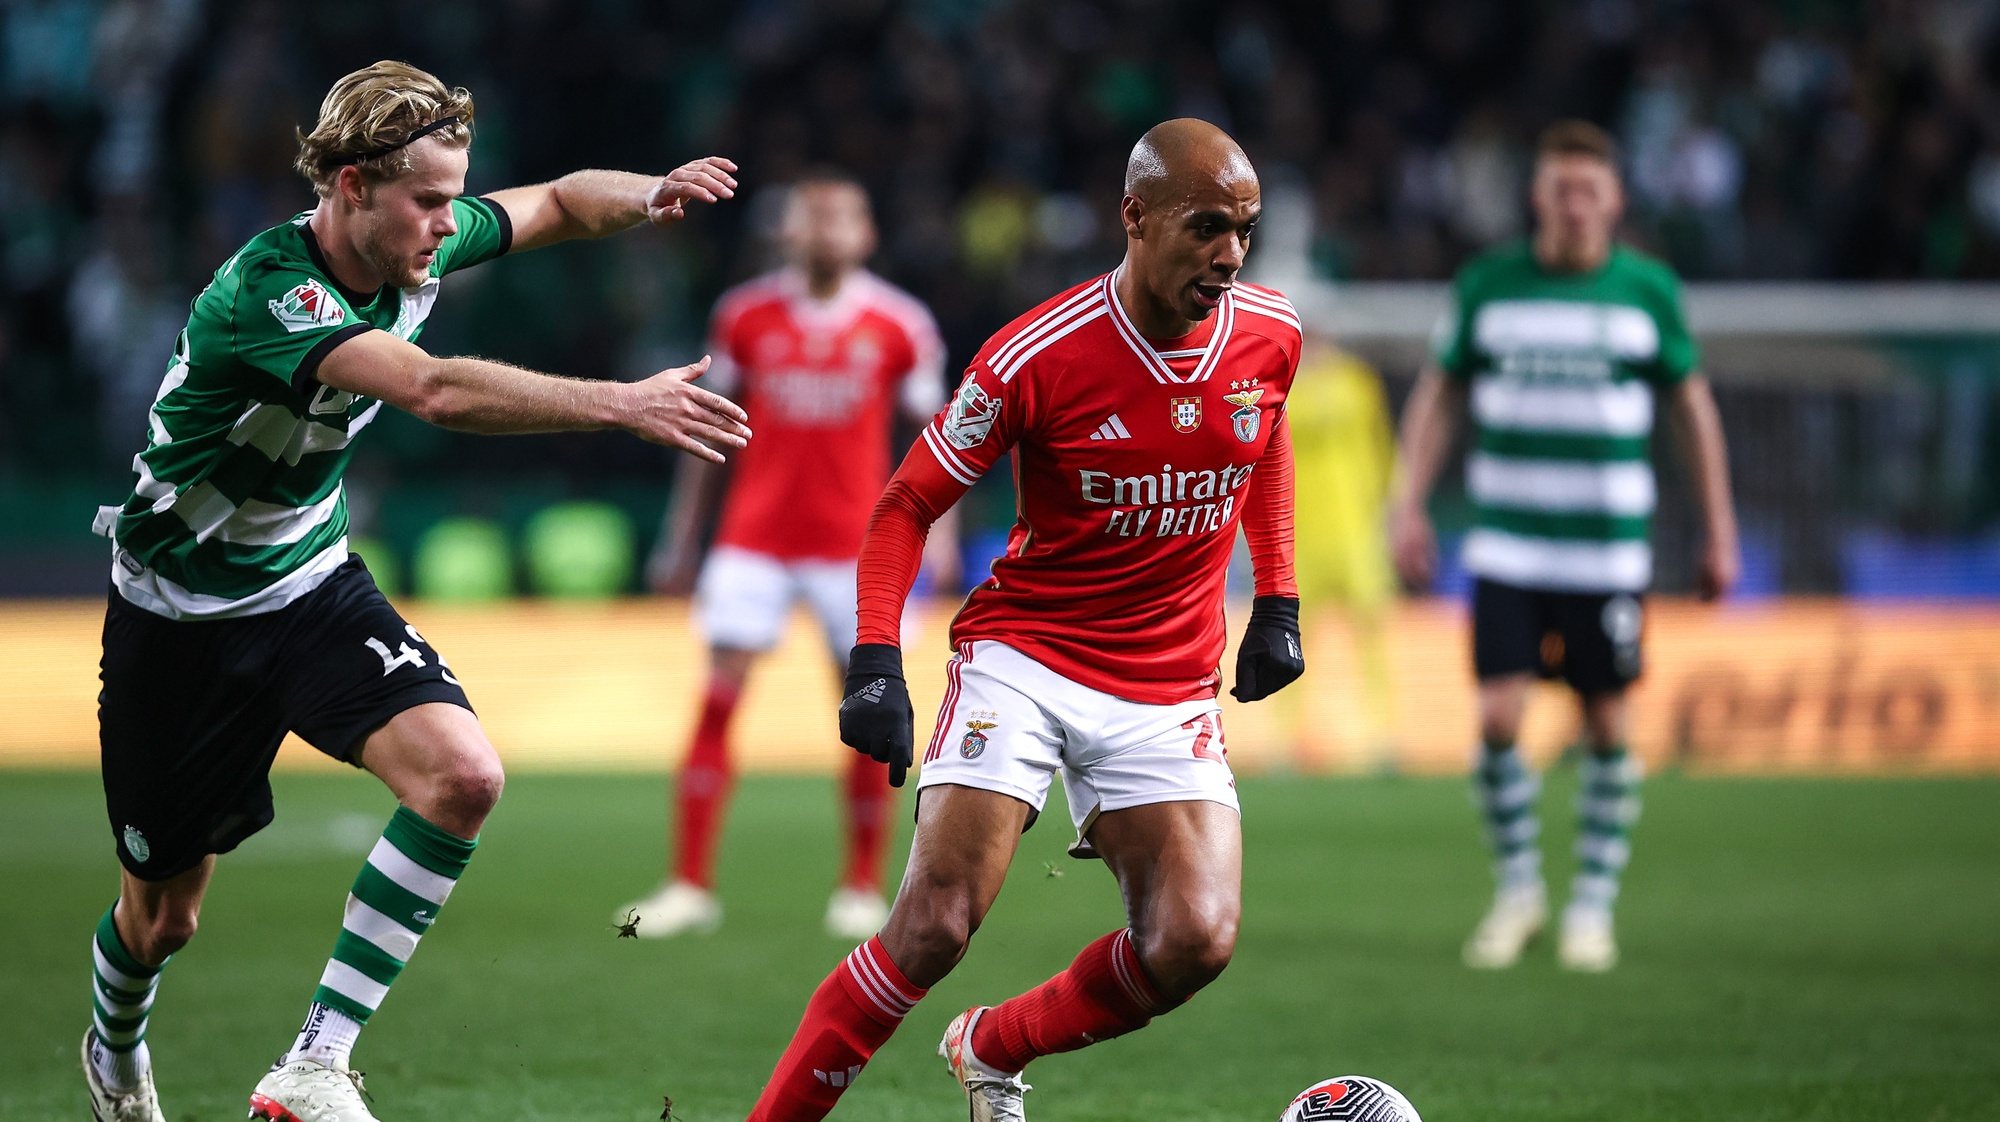 Sporting CP player Morton Hjulmand (L) in action against Benfica player João Mário (C) during the Portugal Soccer Cup first leg semi-final match held at Alvalade Stadium, in Lisbon, Portugal, 29 February 2024. RODRIGO ANTUNES/LUSA